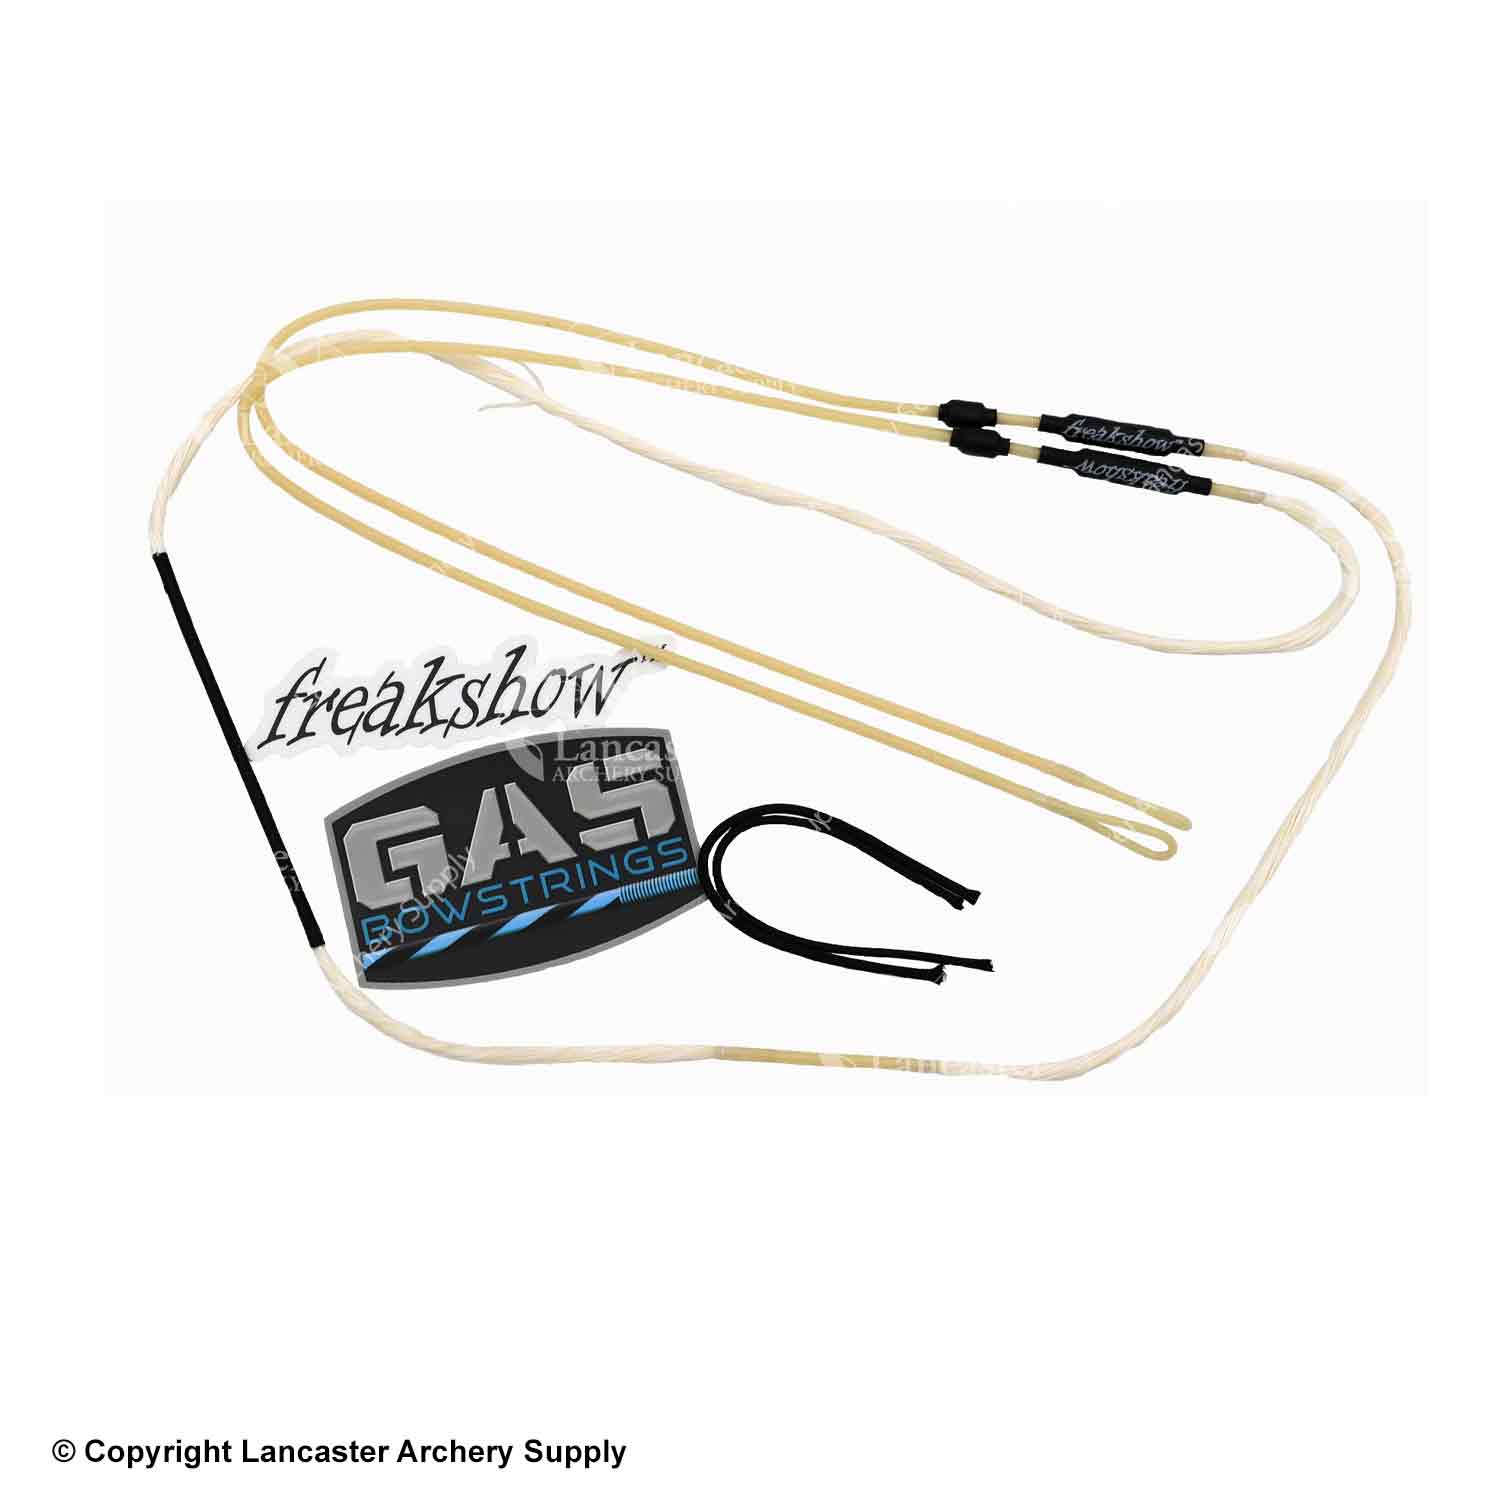 GAS Bowstrings Freakshow String & Cable Complete Set